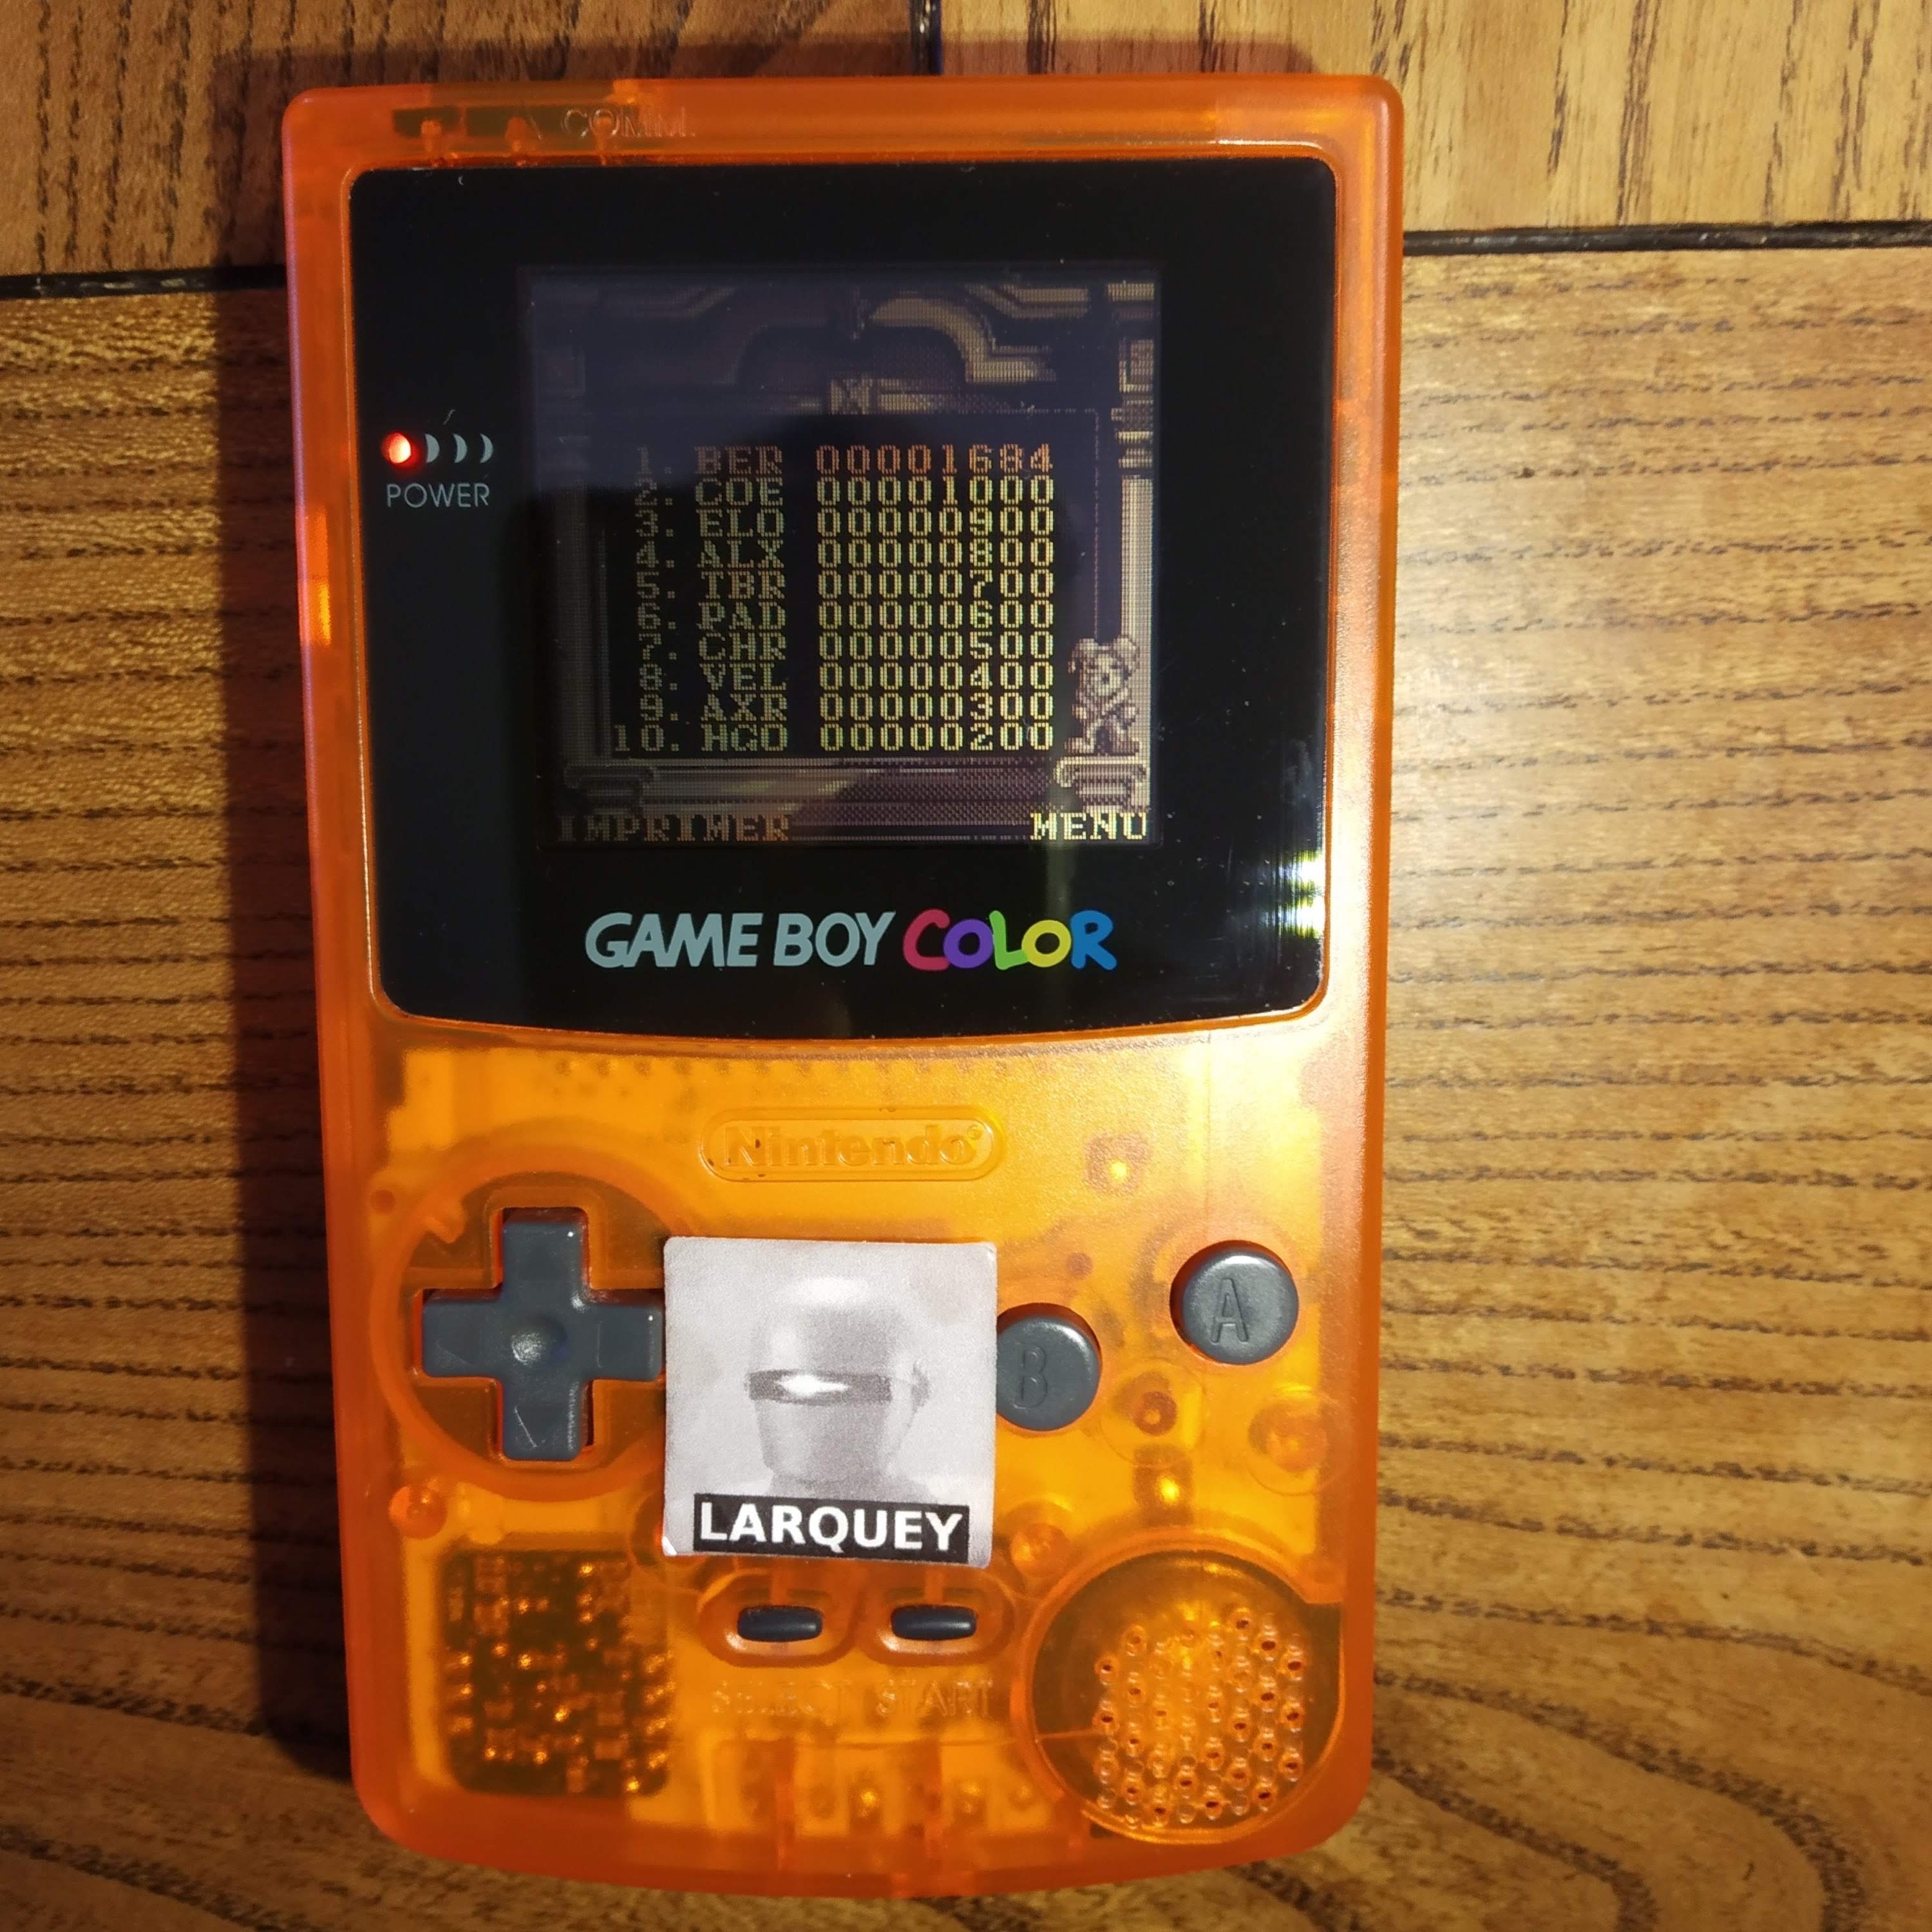 Larquey: Magical Drop [Hard] (Game Boy Color) 1,684 points on 2020-06-15 10:44:34